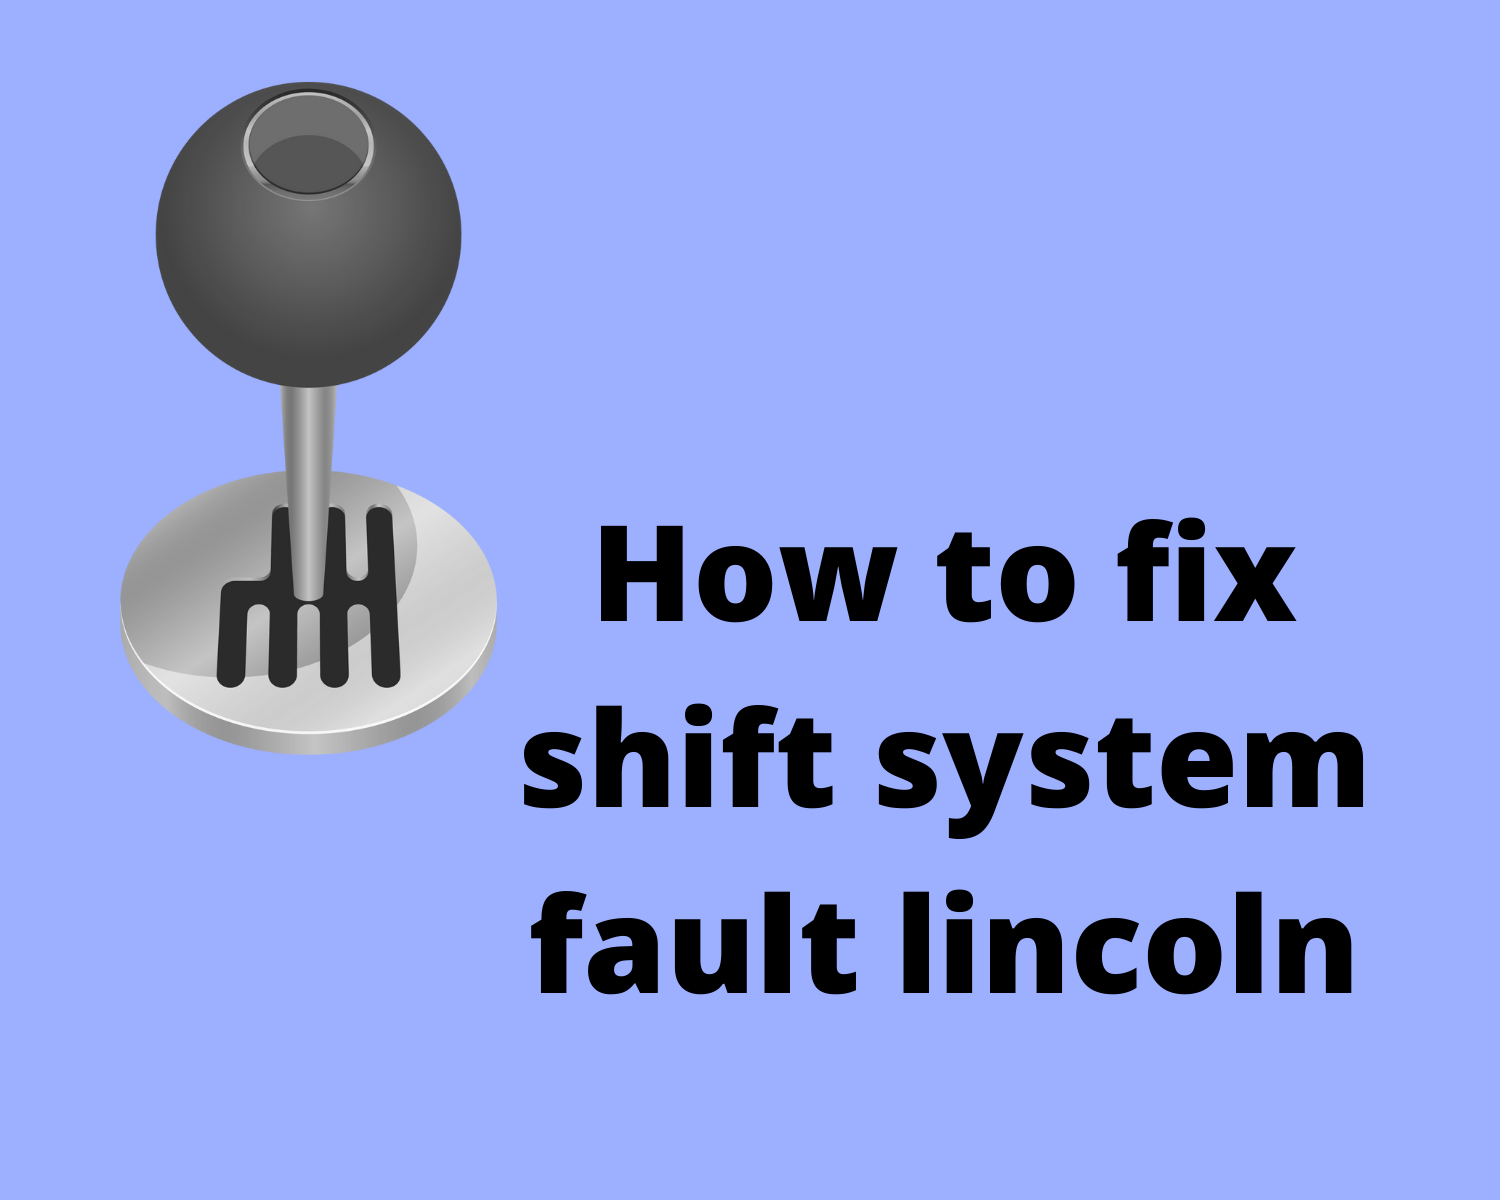 How to fix shift system fault lincoln